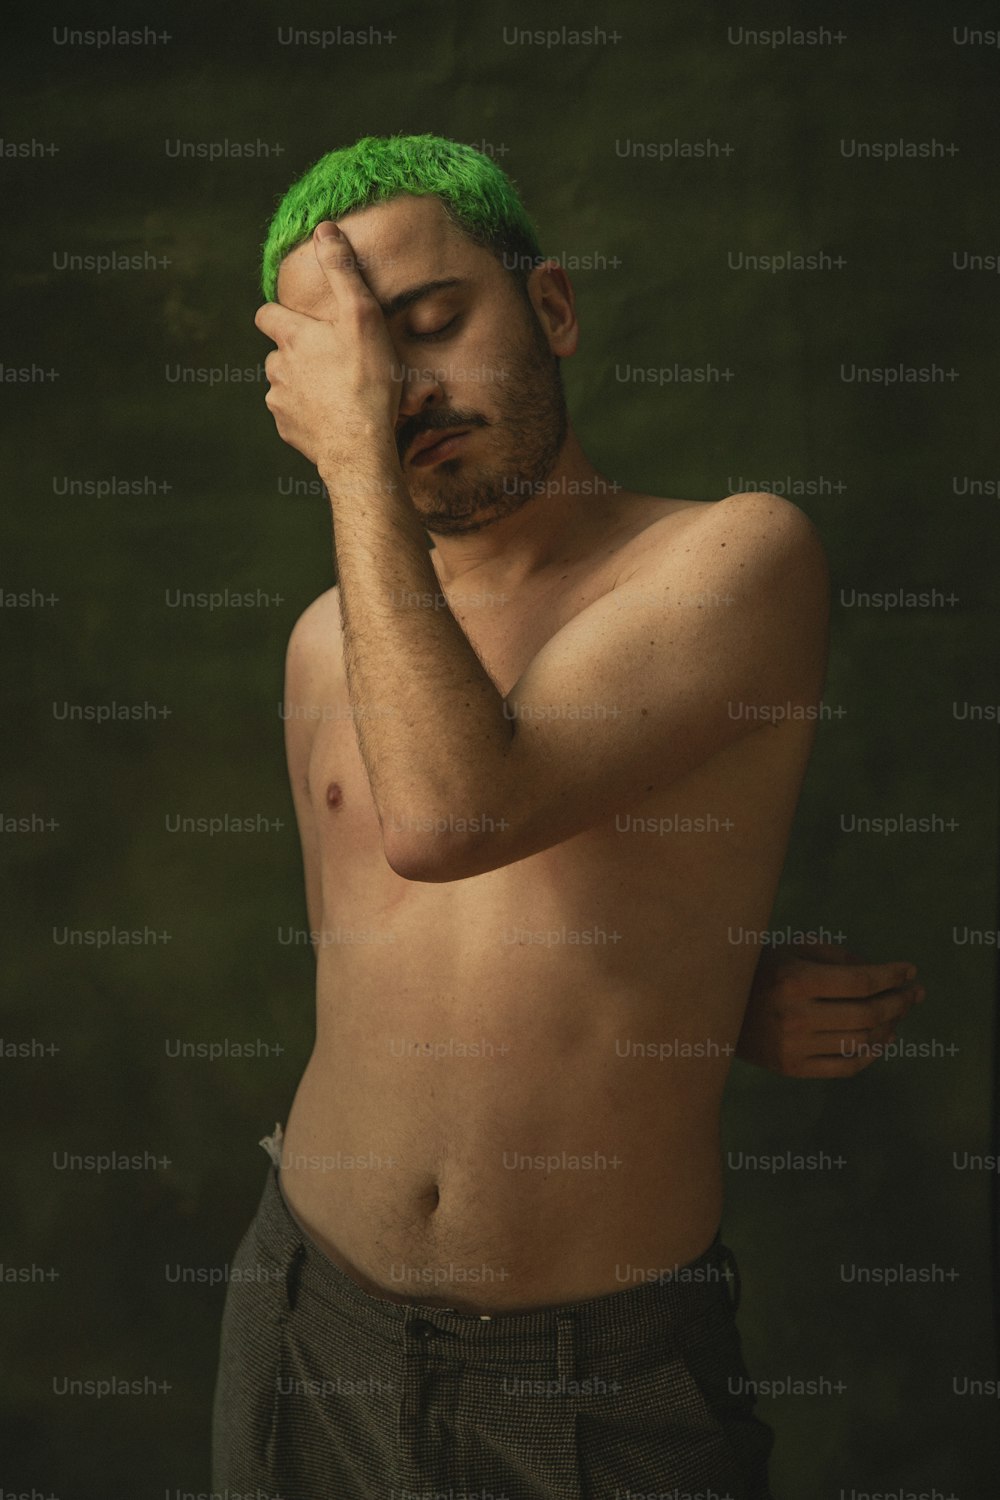 a shirtless man with green hair covering his eyes